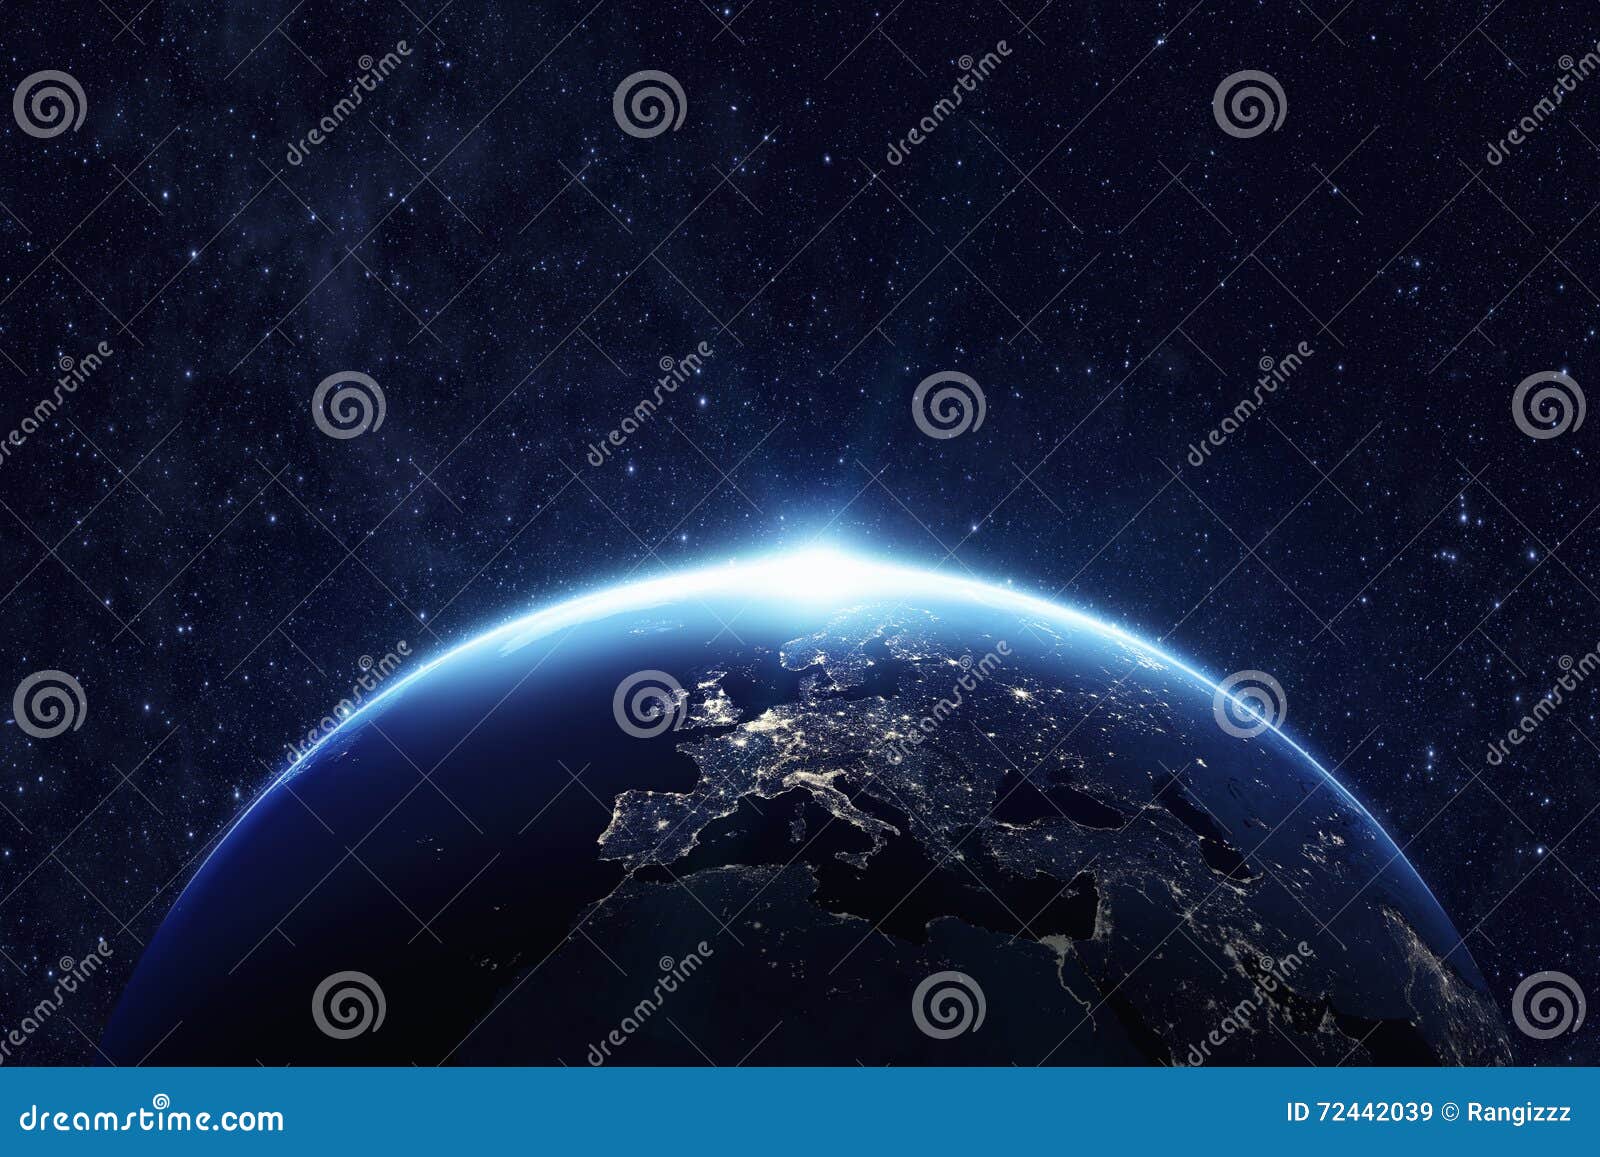 planet earth at night